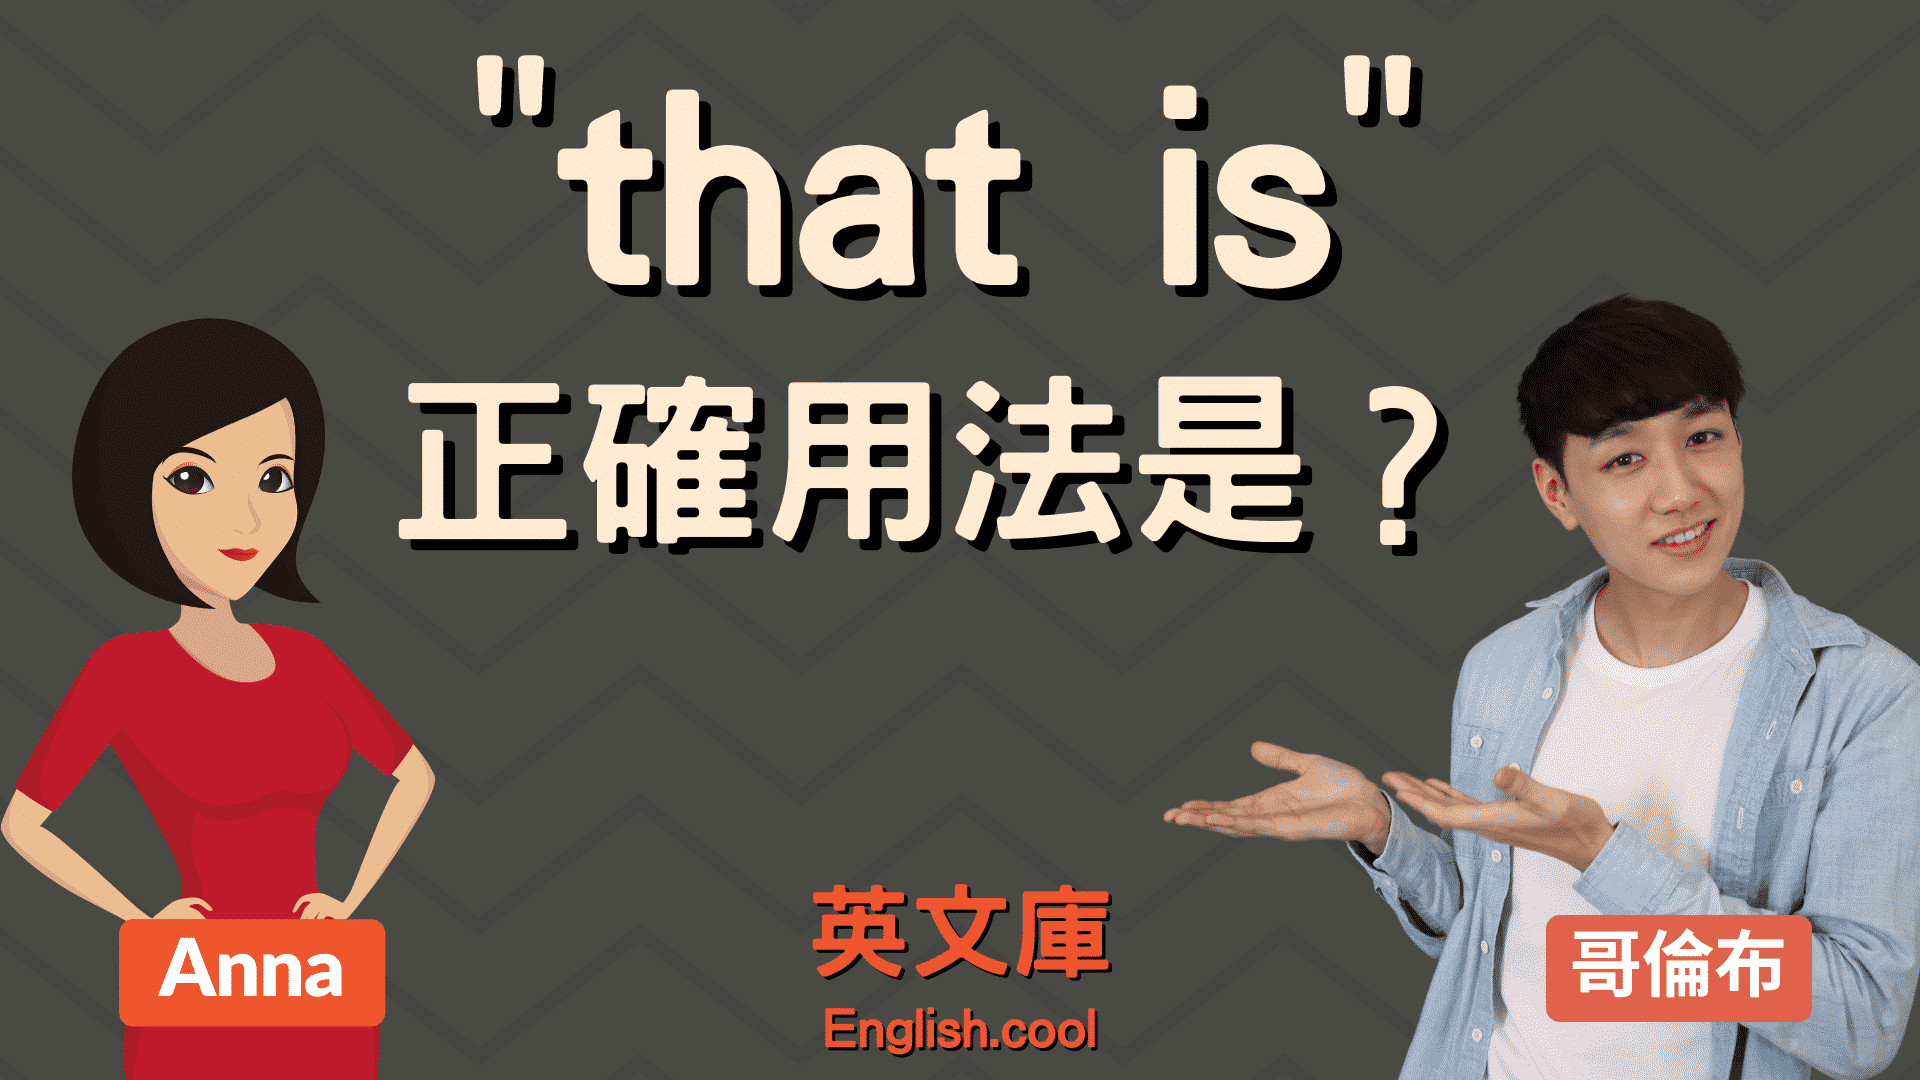 You are currently viewing 「that is」的正確用法是？